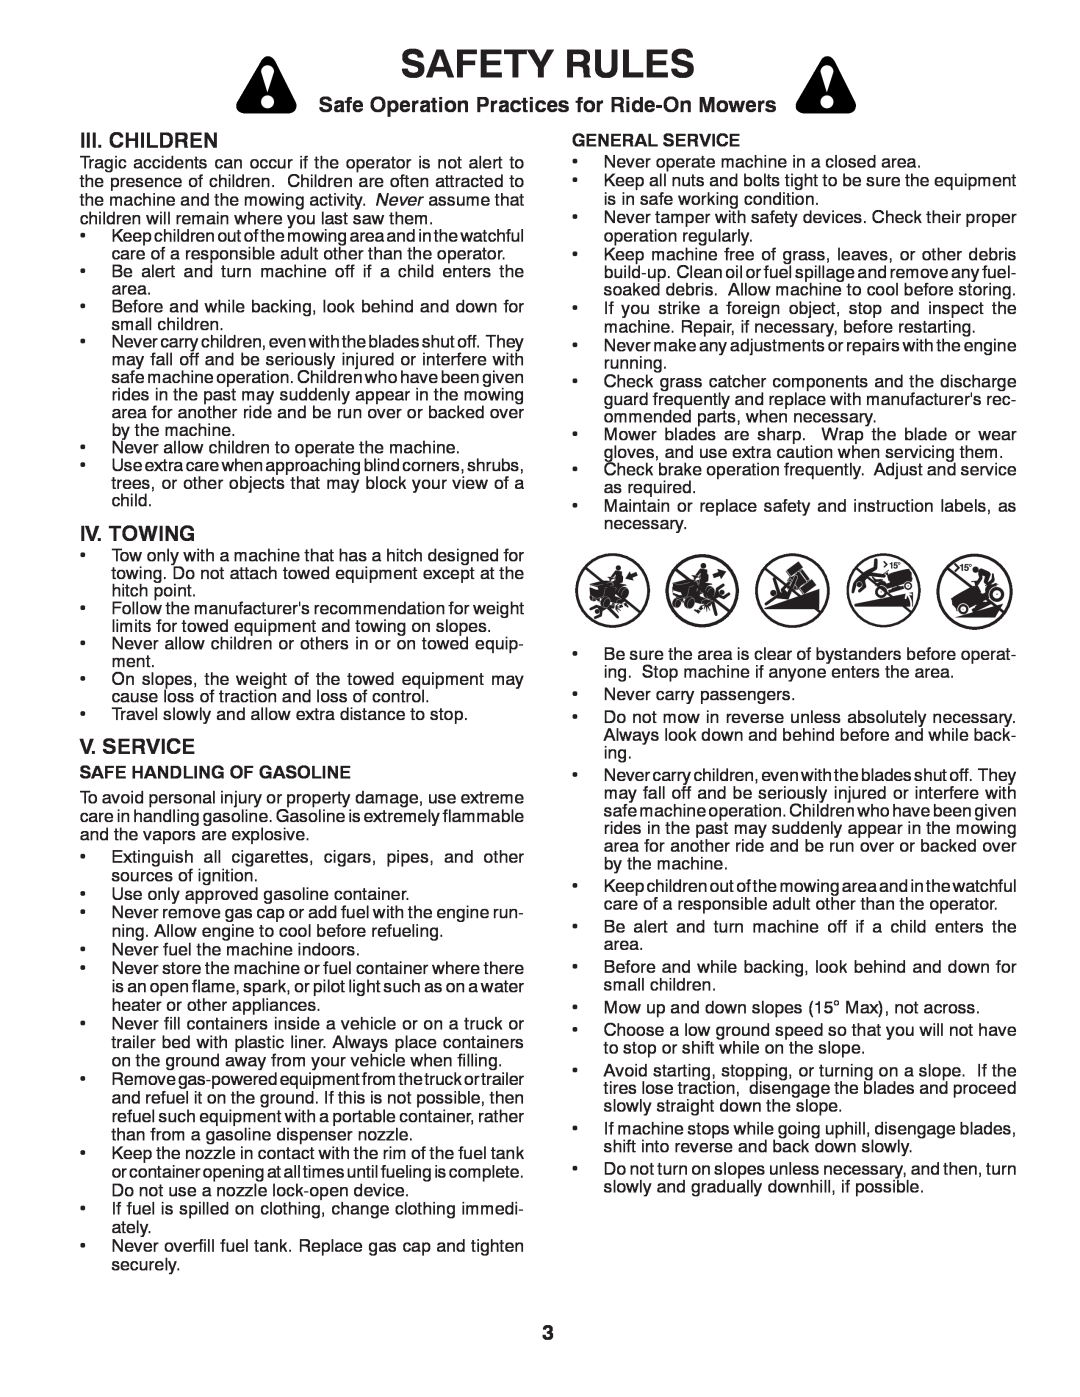 Poulan PP14538 manual Iii. Children, Iv. Towing, V. Service, Safety Rules, Safe Operation Practices for Ride-On Mowers 